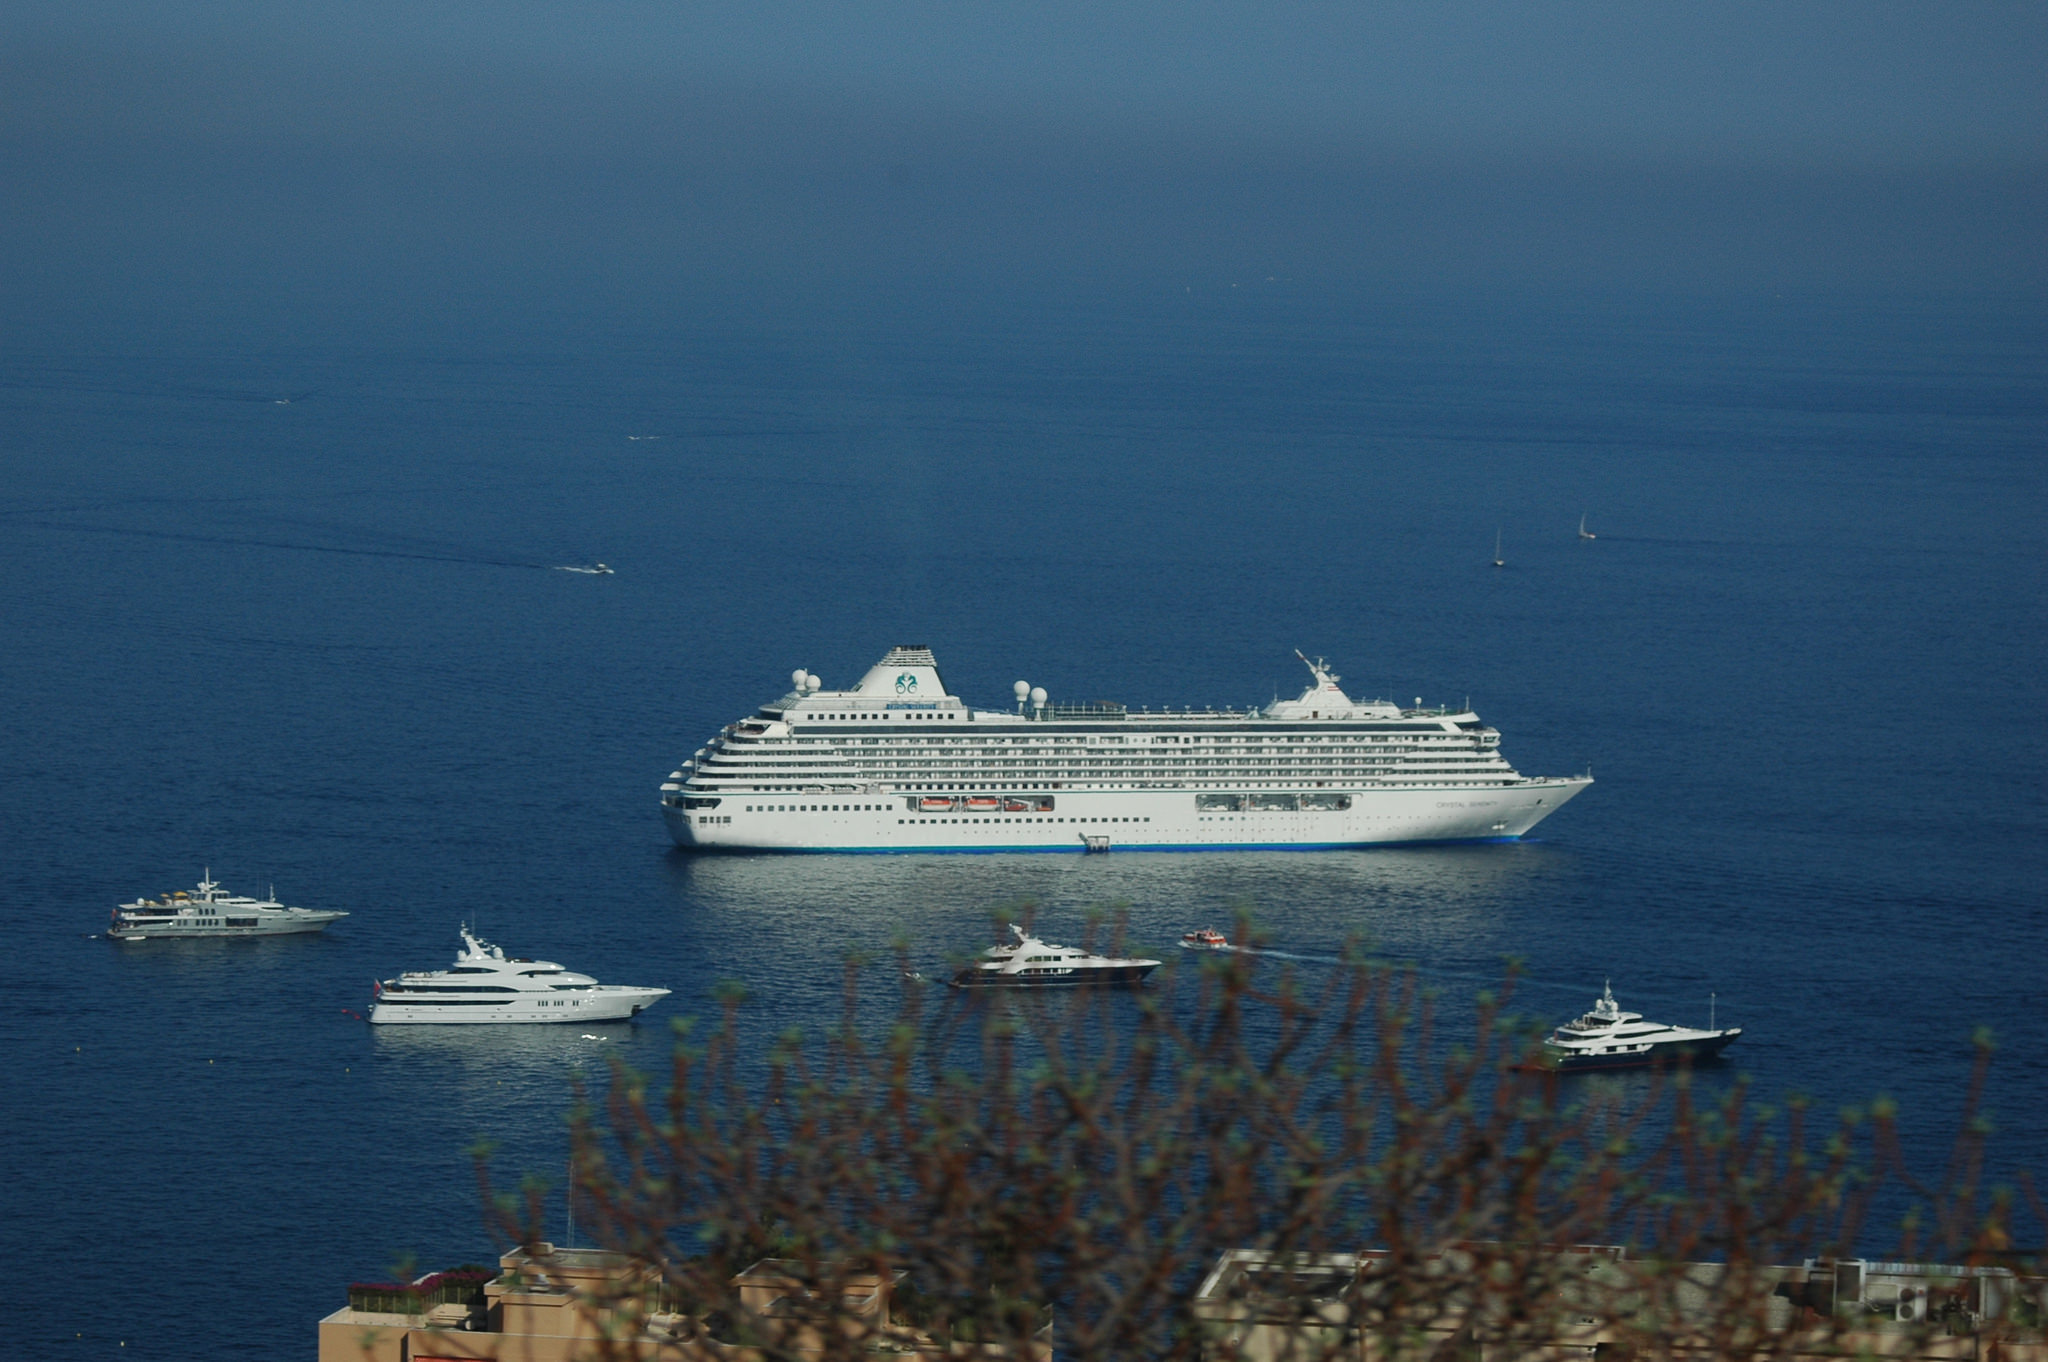 Diary of a cruise virgin: Day 6 on MSC Splendida excursion into Marseilles France